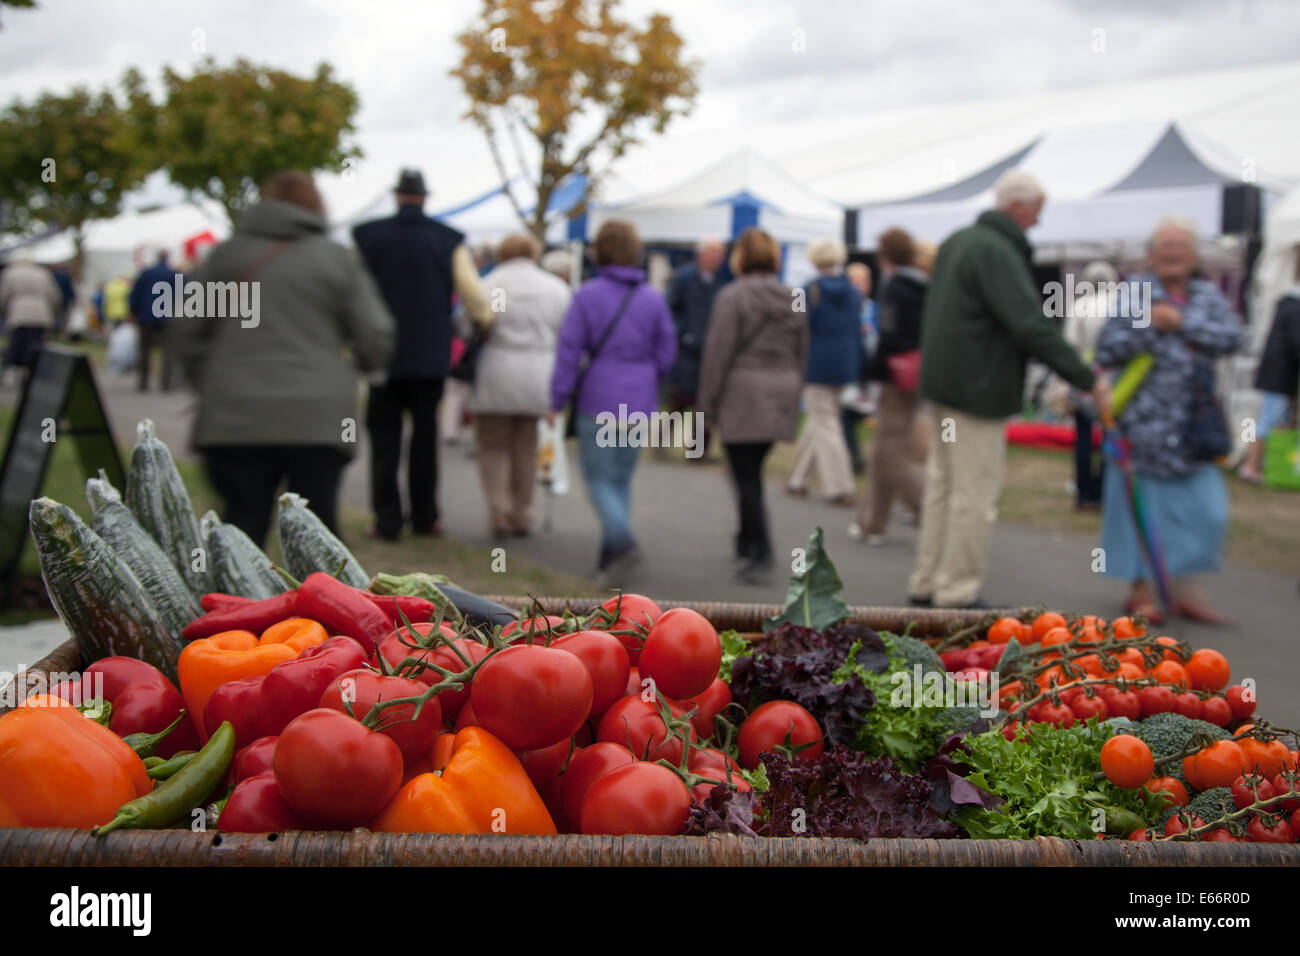 Southport, Merseyside, UK.  16th August, 2014.  Fruit display and crowds at  Britain’s biggest independent flower show.   Credit:  Mar Photographics/Alamy Live News. Stock Photo